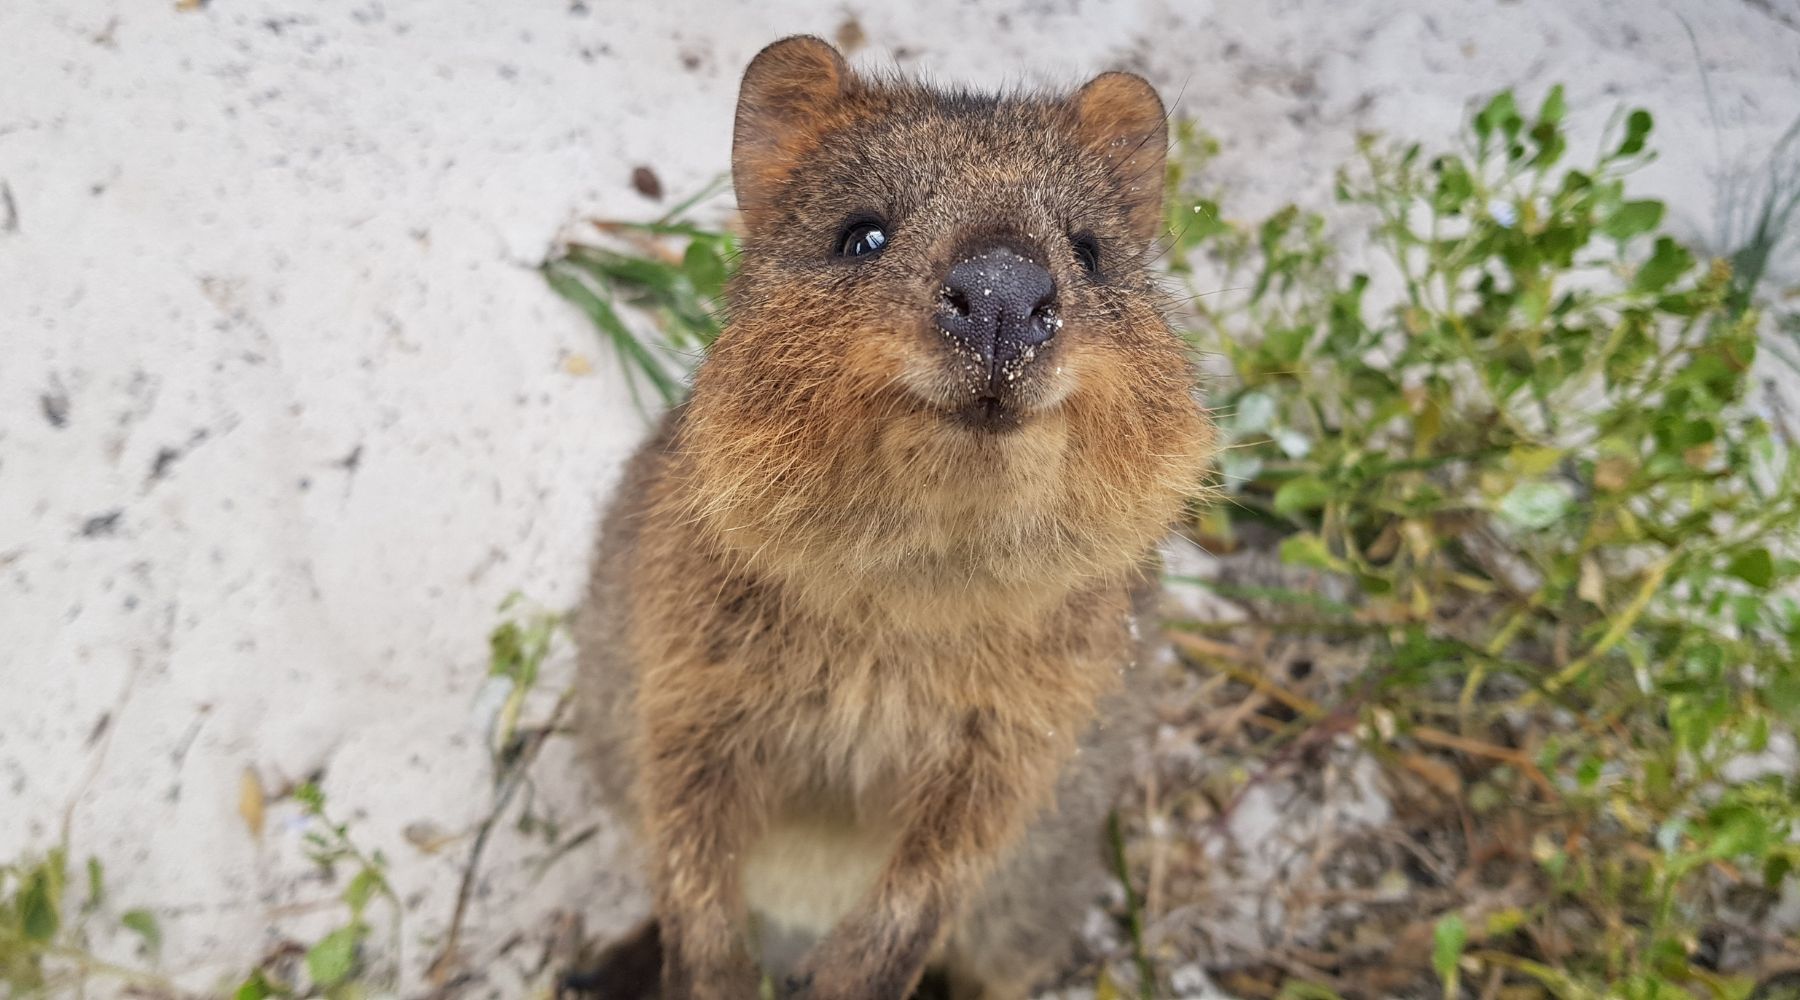 Quokka - the happiest animal in the world